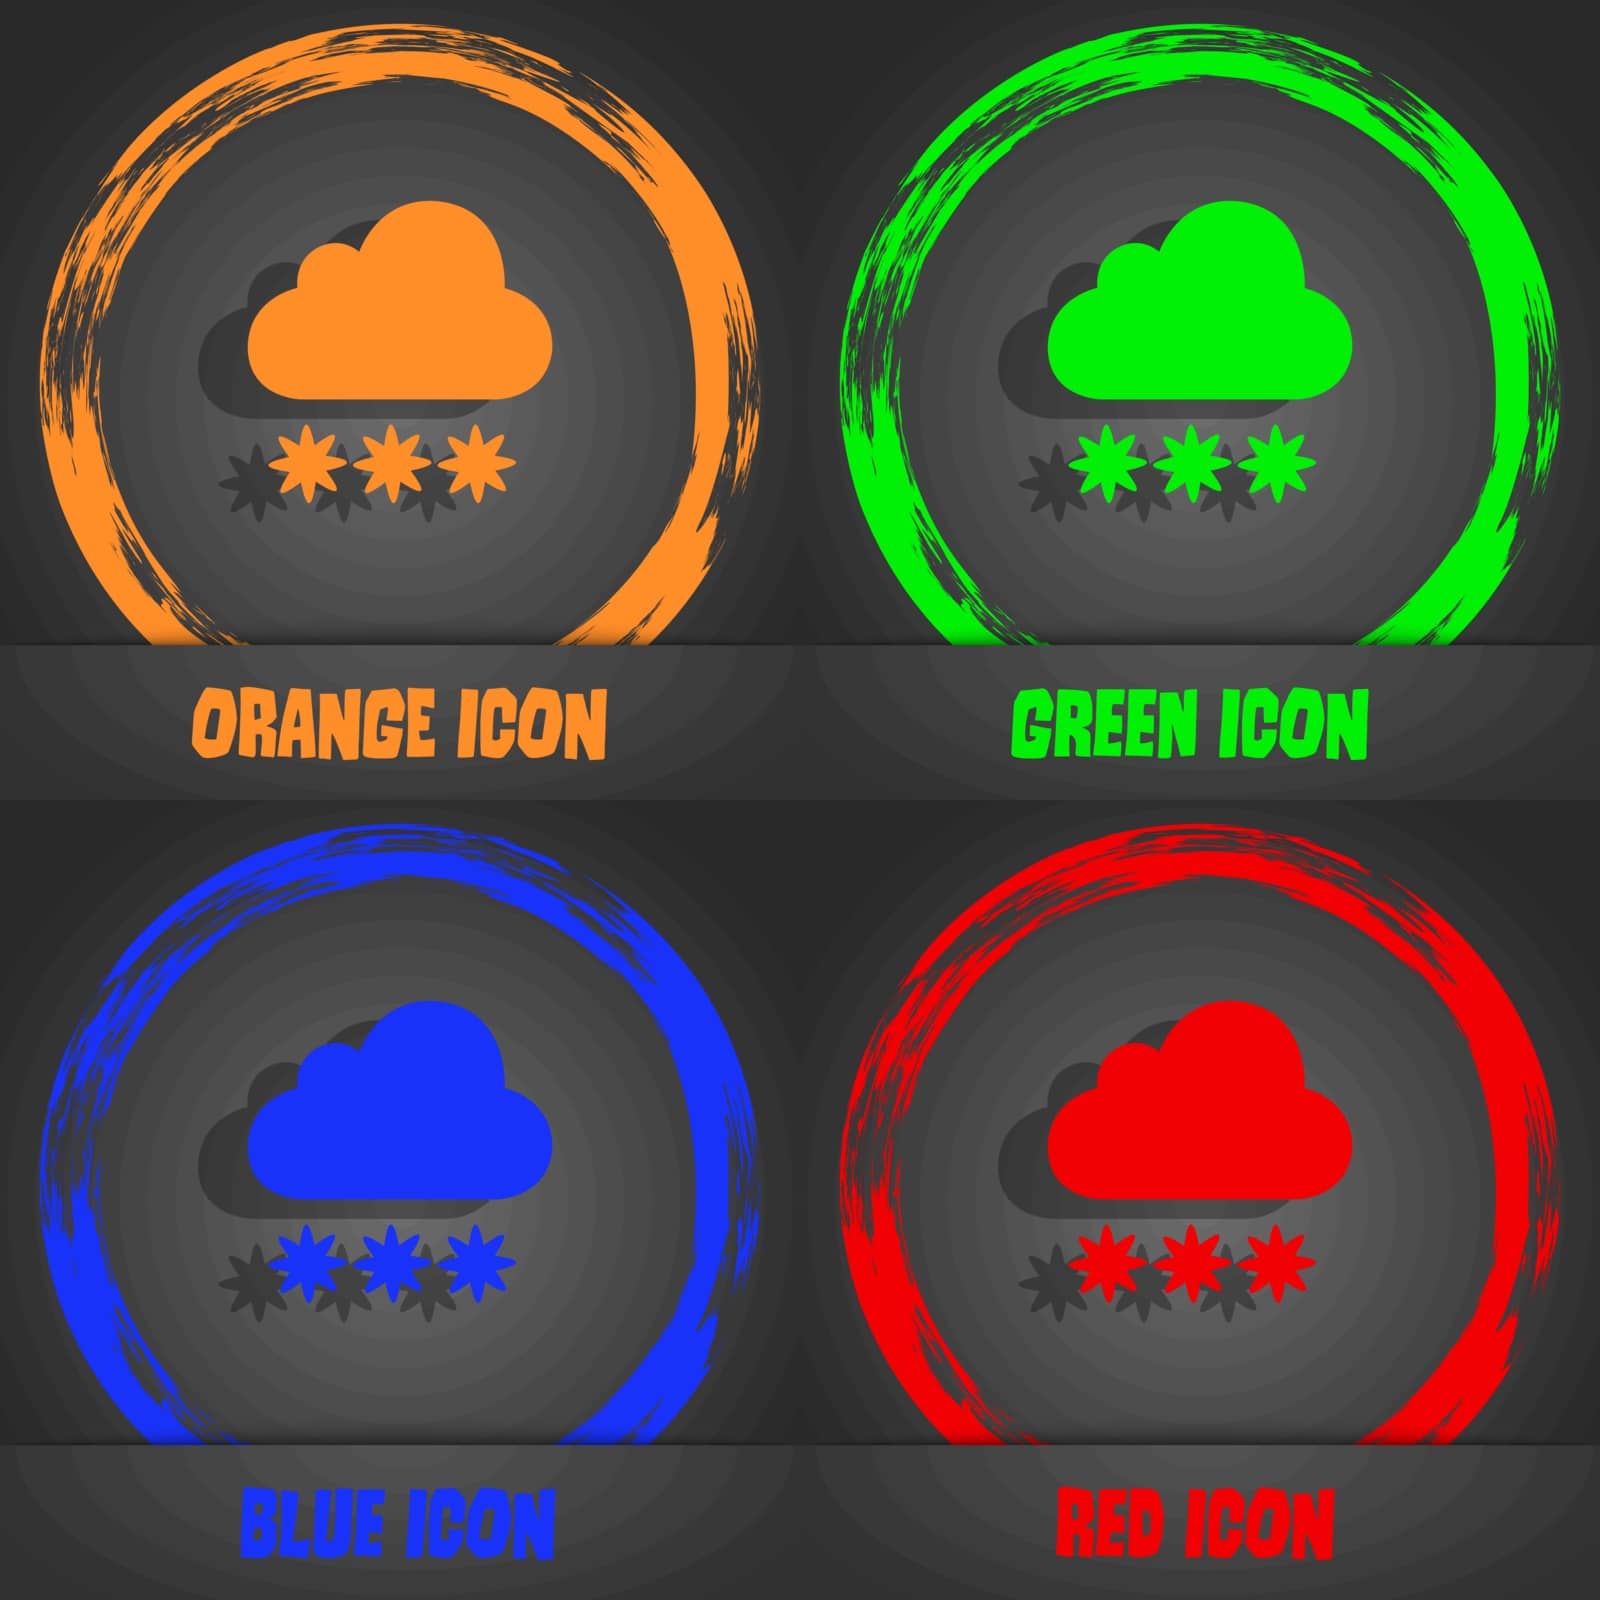 snow cloud icon. Fashionable modern style. In the orange, green, blue, red design. Vector illustration